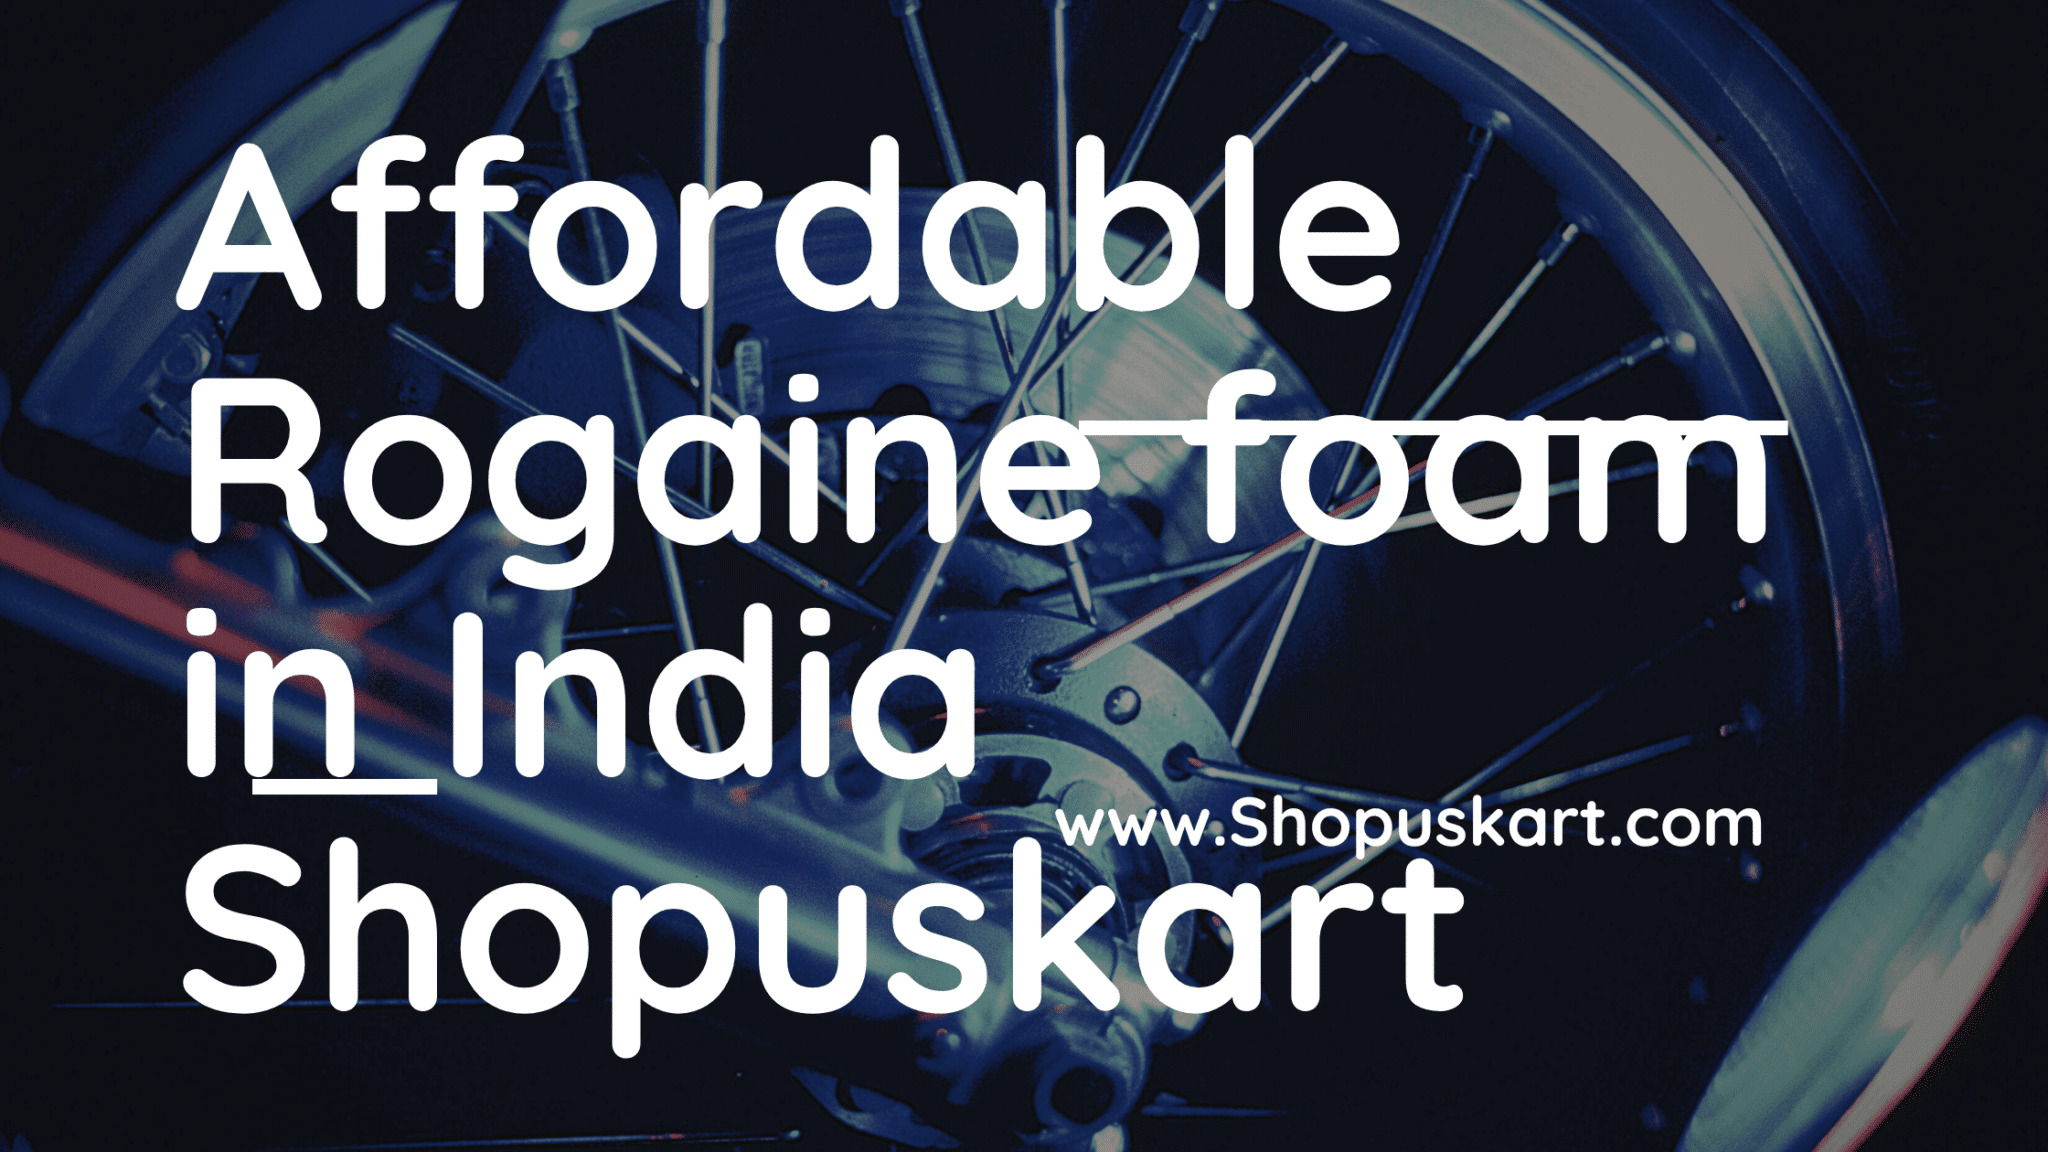 Affordable Rogaine